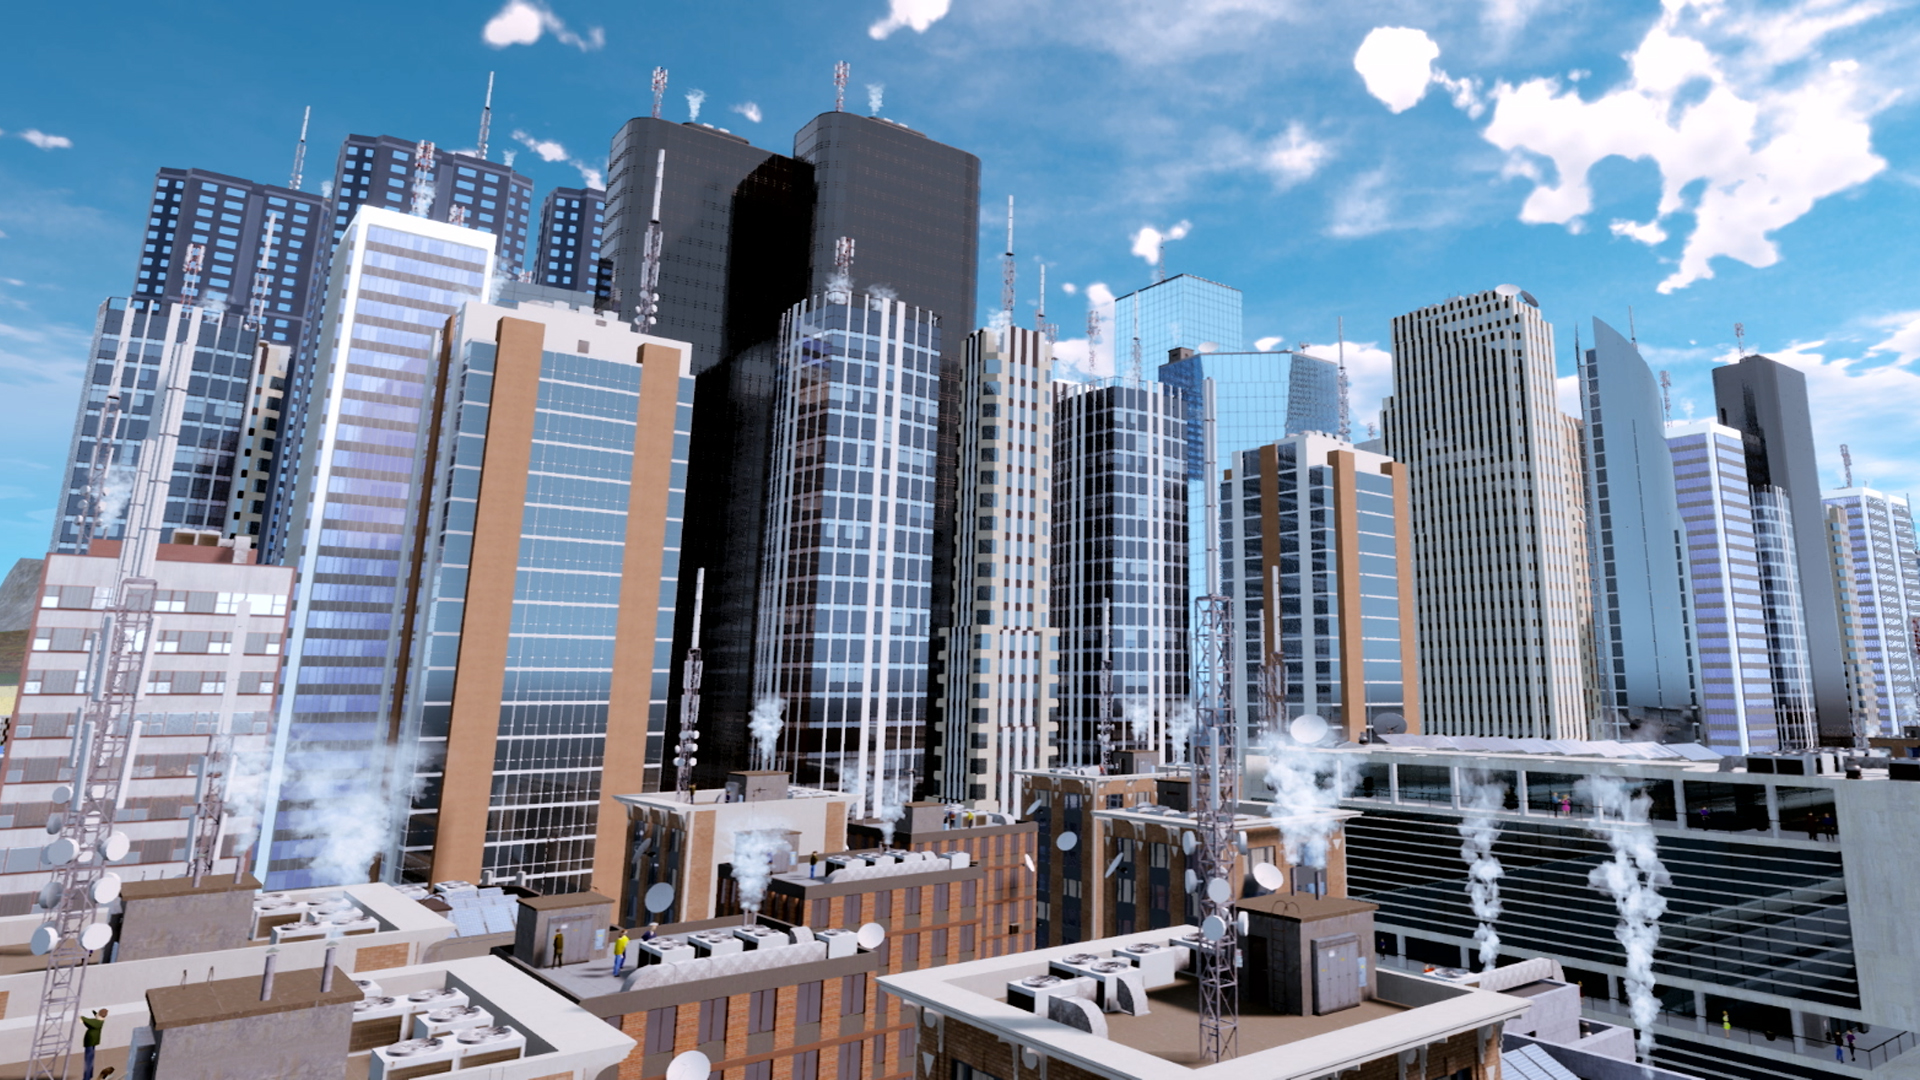 “Next evolution” city builder Highrise City is getting a beta test this week